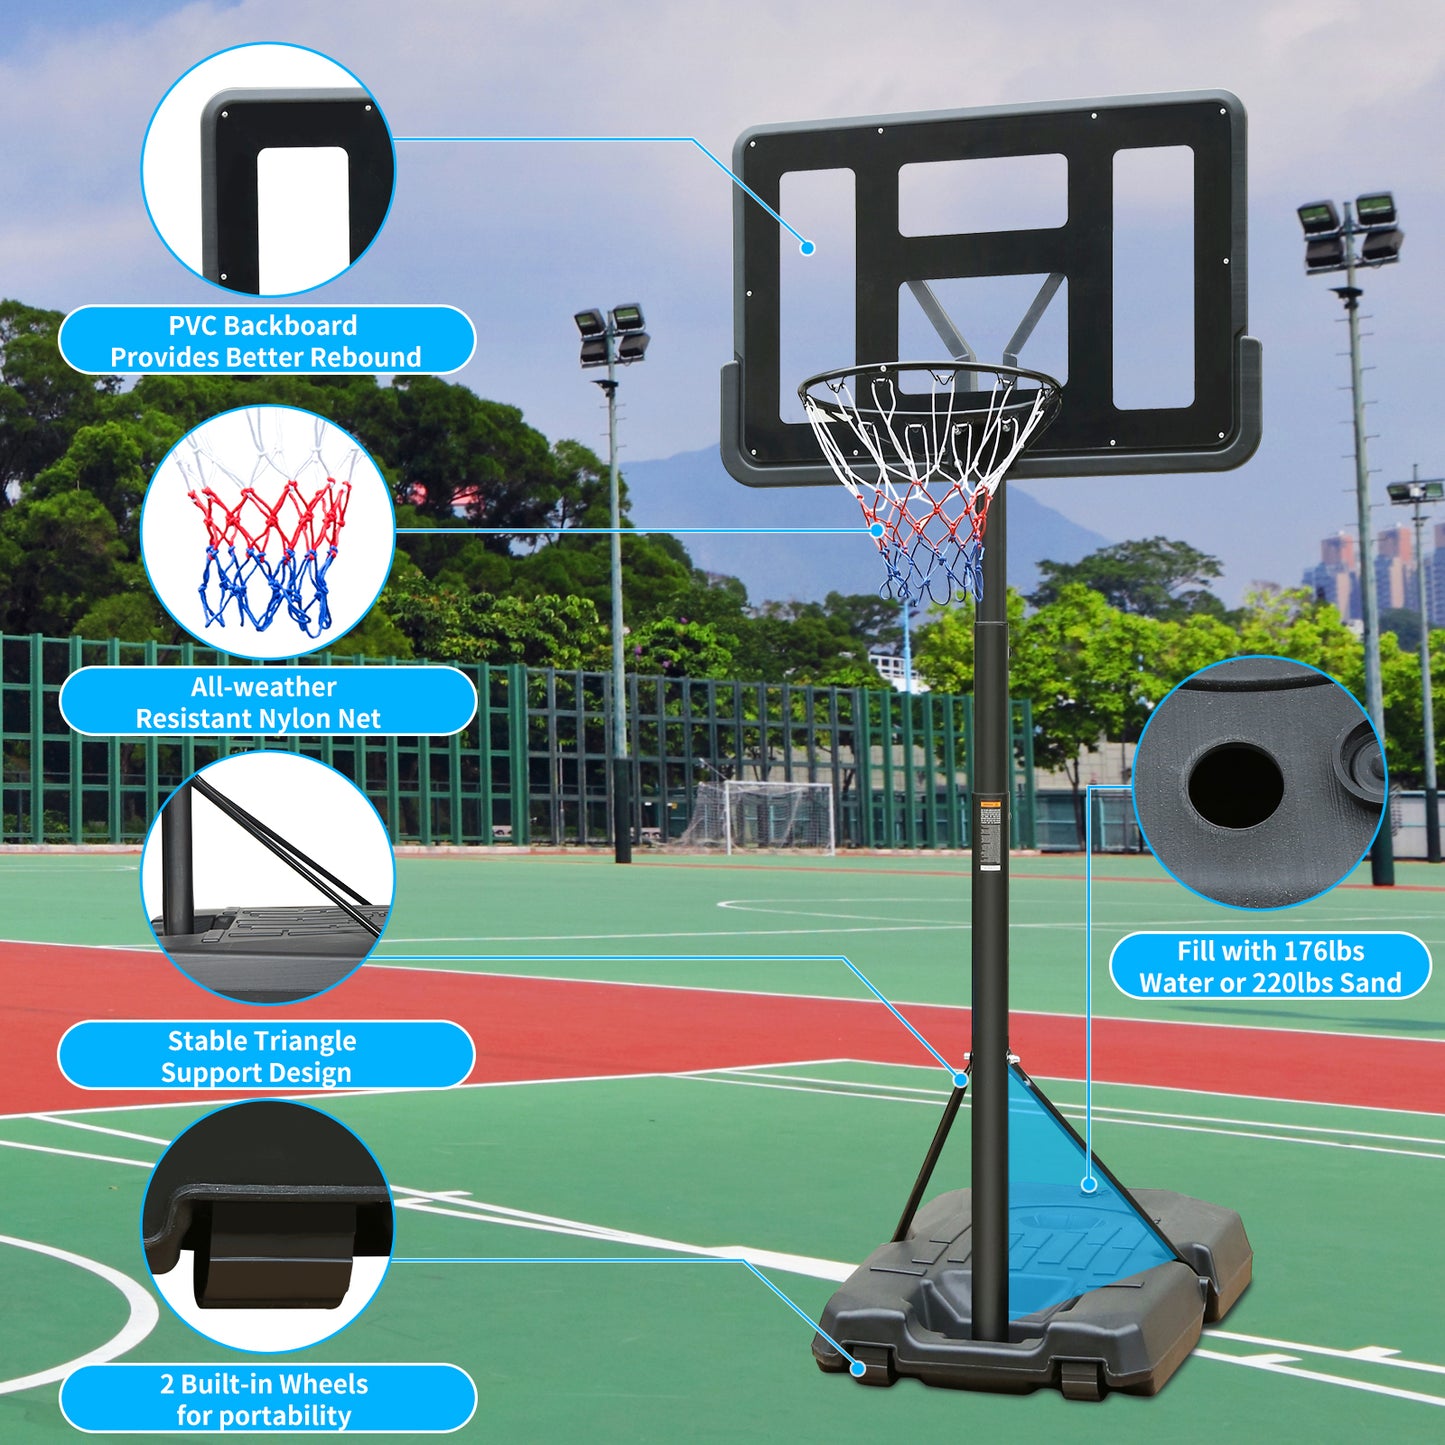 Portable Basketball Hoop Height Adjustable stand 6.6ft - 10ft